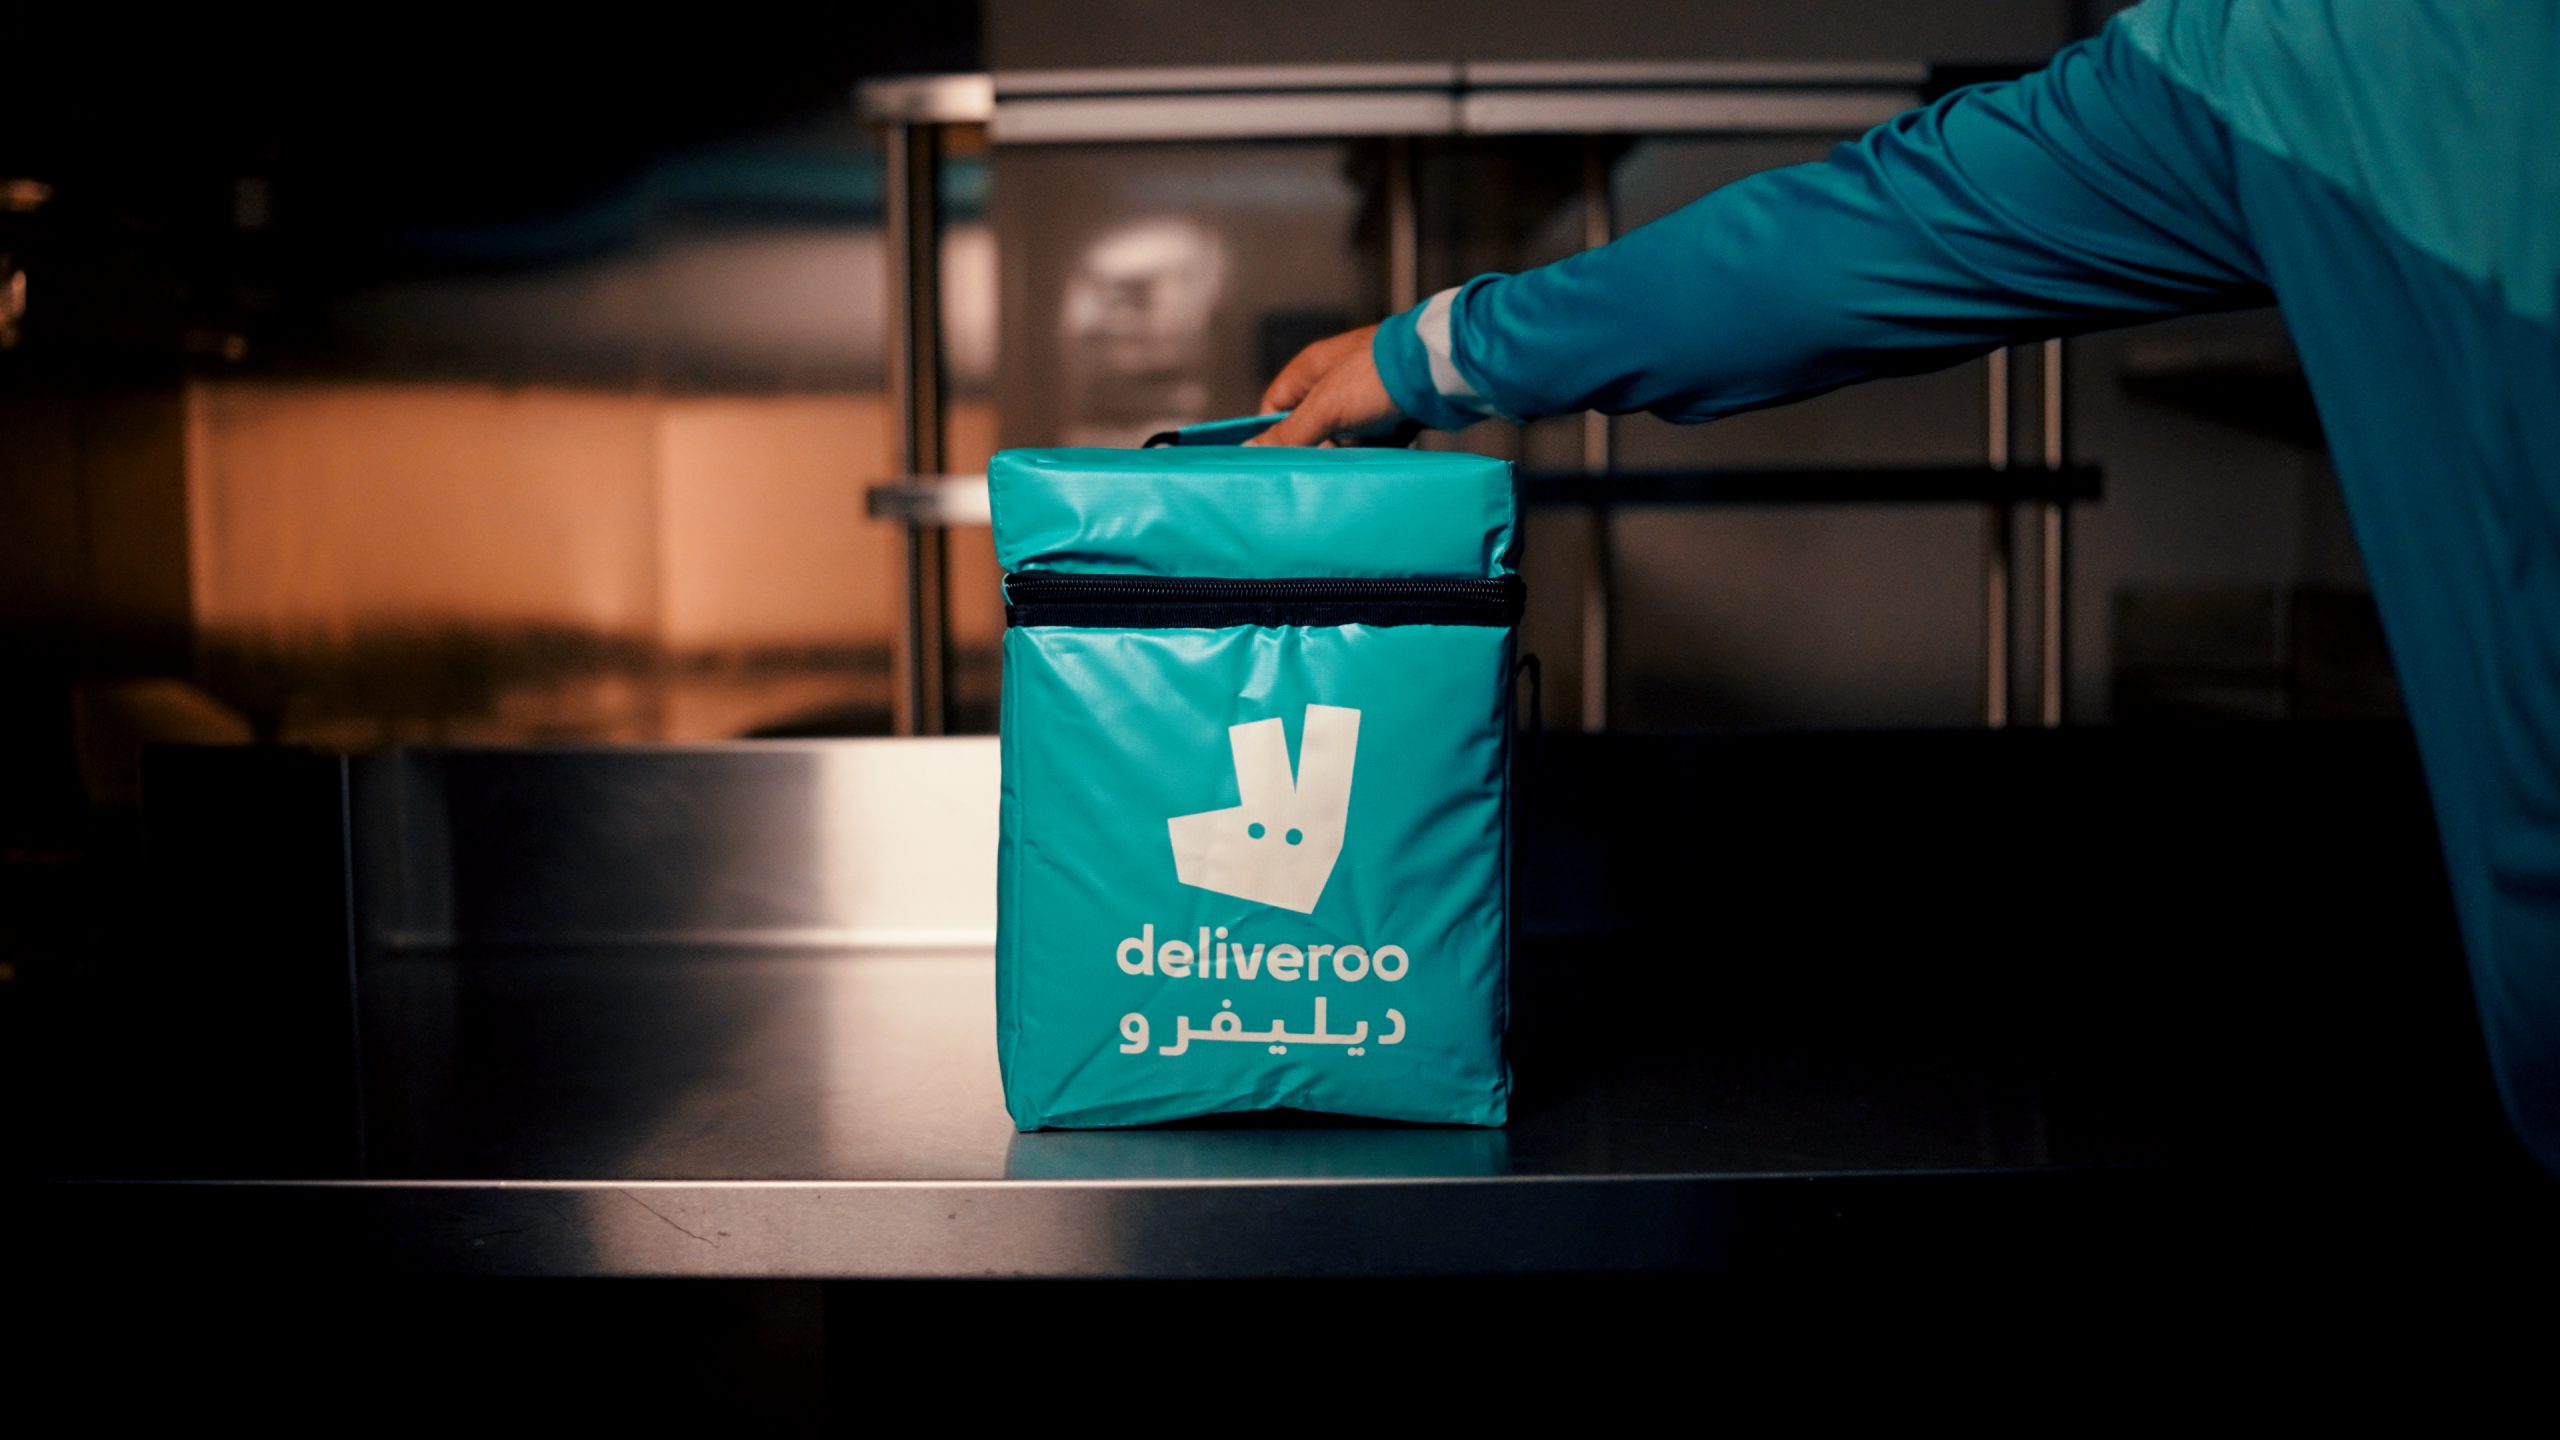 Qatar, Deliveroo has Arrived!